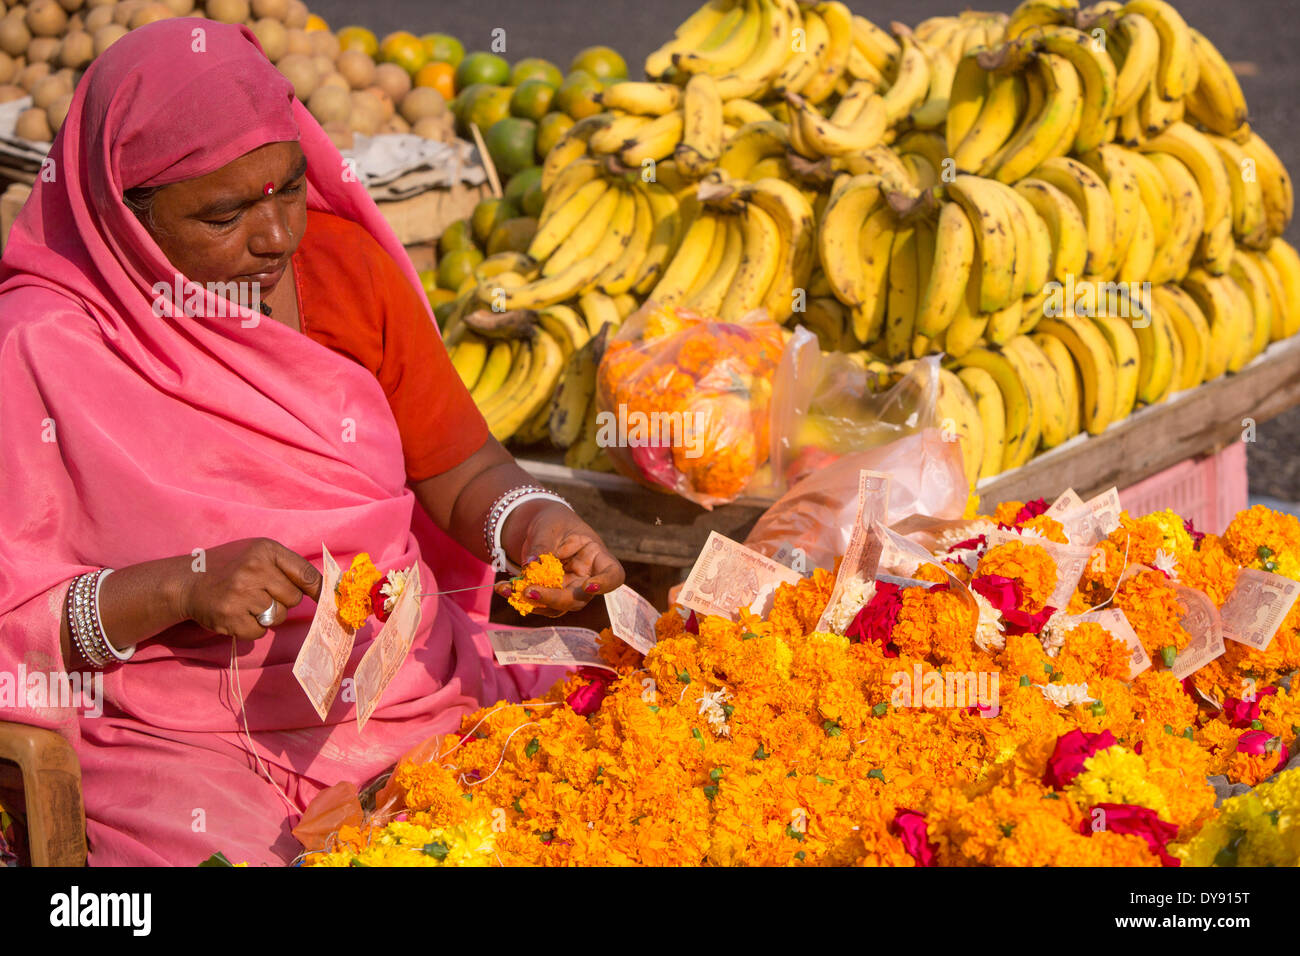 Market, Old Town, Udaipur, Rajasthan, Asia, India, town, city, woman, traditional, fruits, bananas, Stock Photo